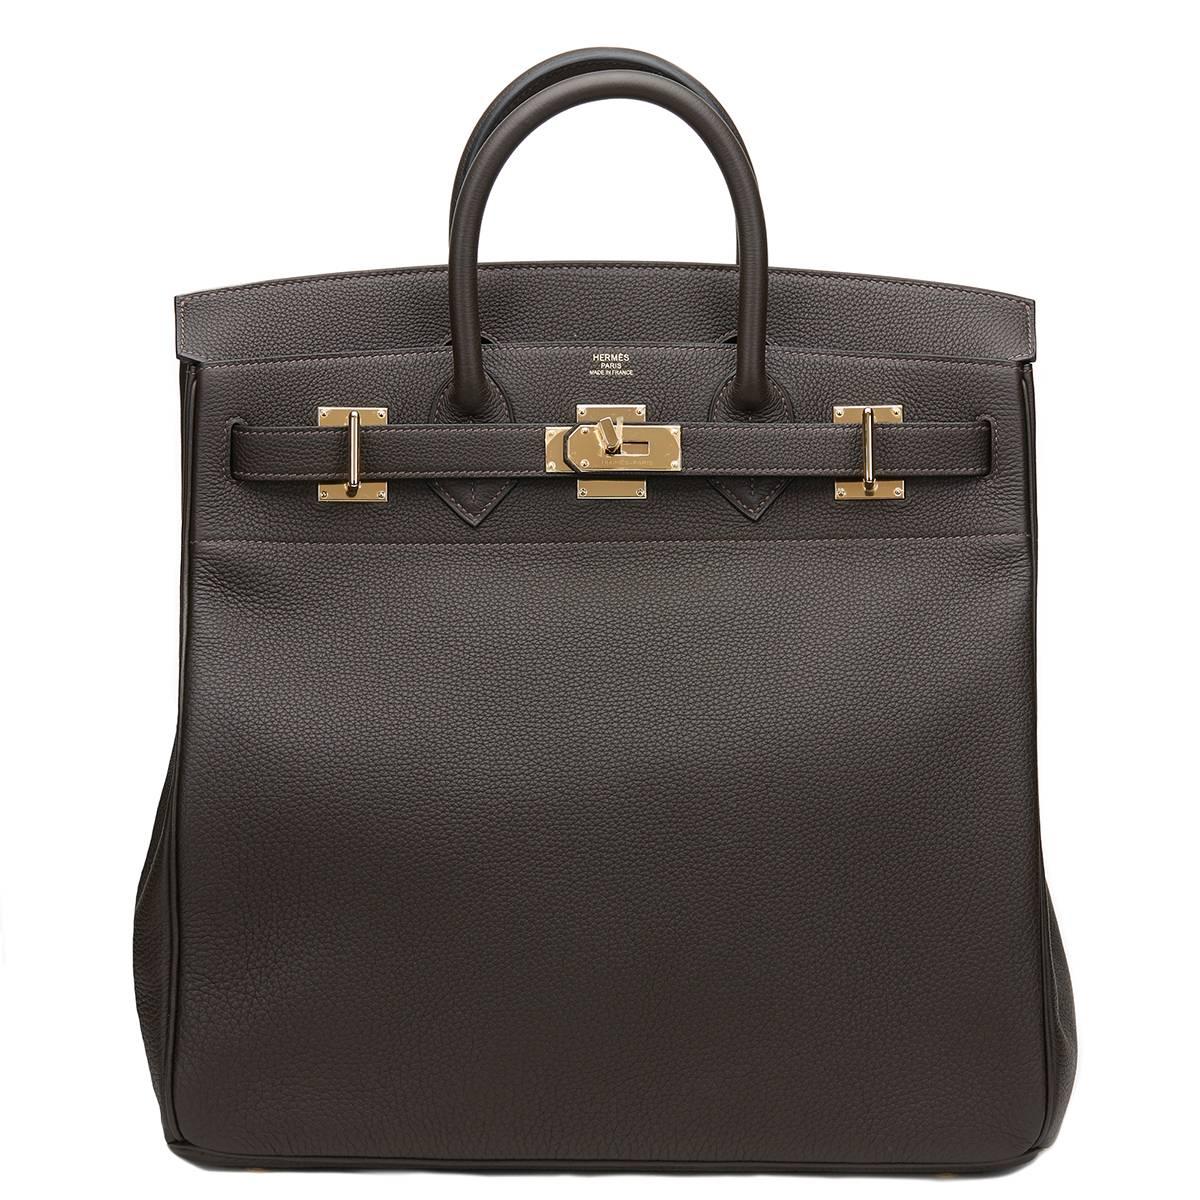 HERMES
Macassar Togo Leather Birkin 40cm HAC 2016

This unisex Hermès Birkin 40cm HAC is primarily made from macassar togo leather complemented by permabrass hardware. This bag is in unworn condition accompanied by Hermes dust bag, box, padlock,